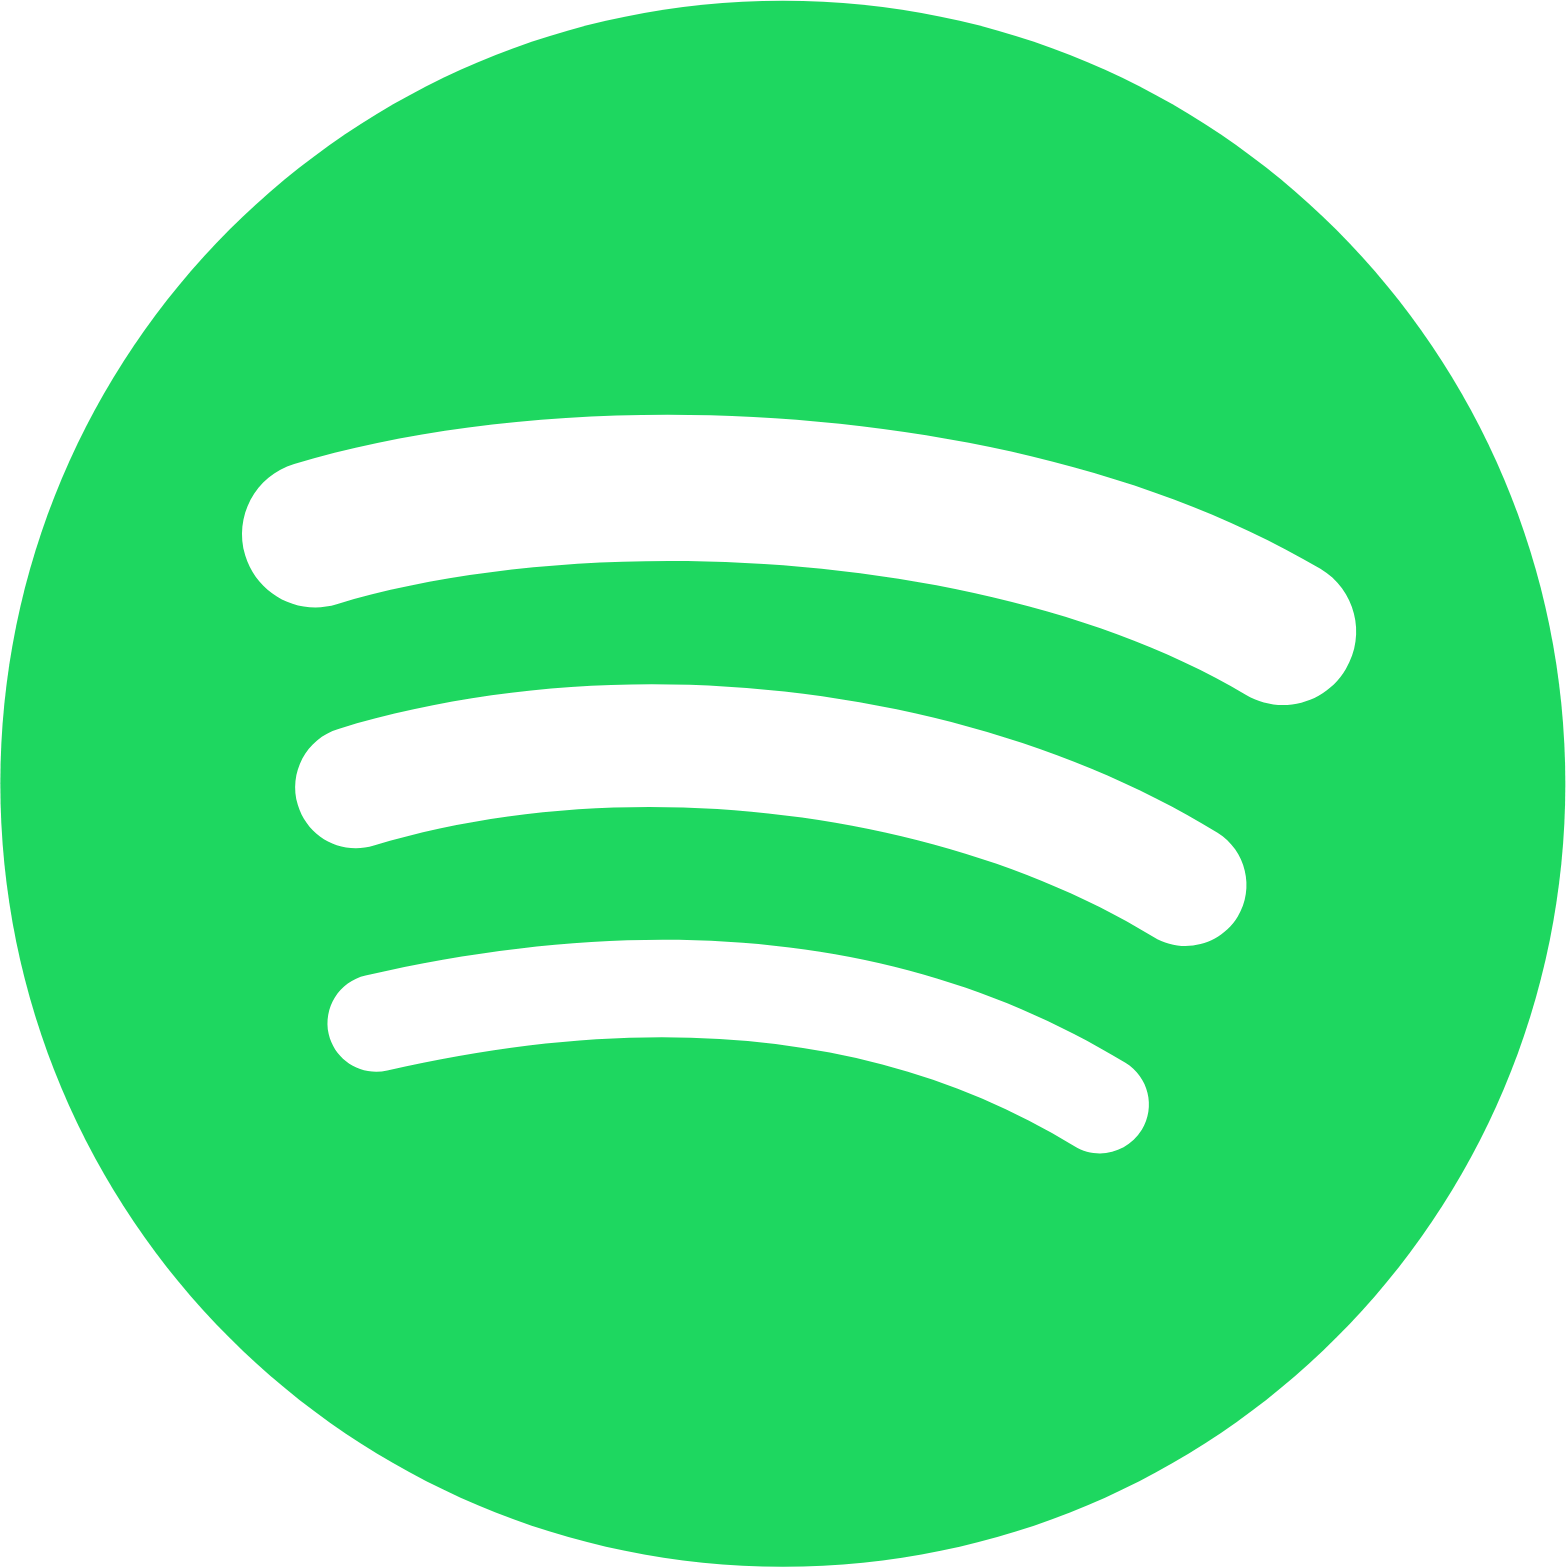 Spotify logo in transparent PNG and vectorized SVG formats